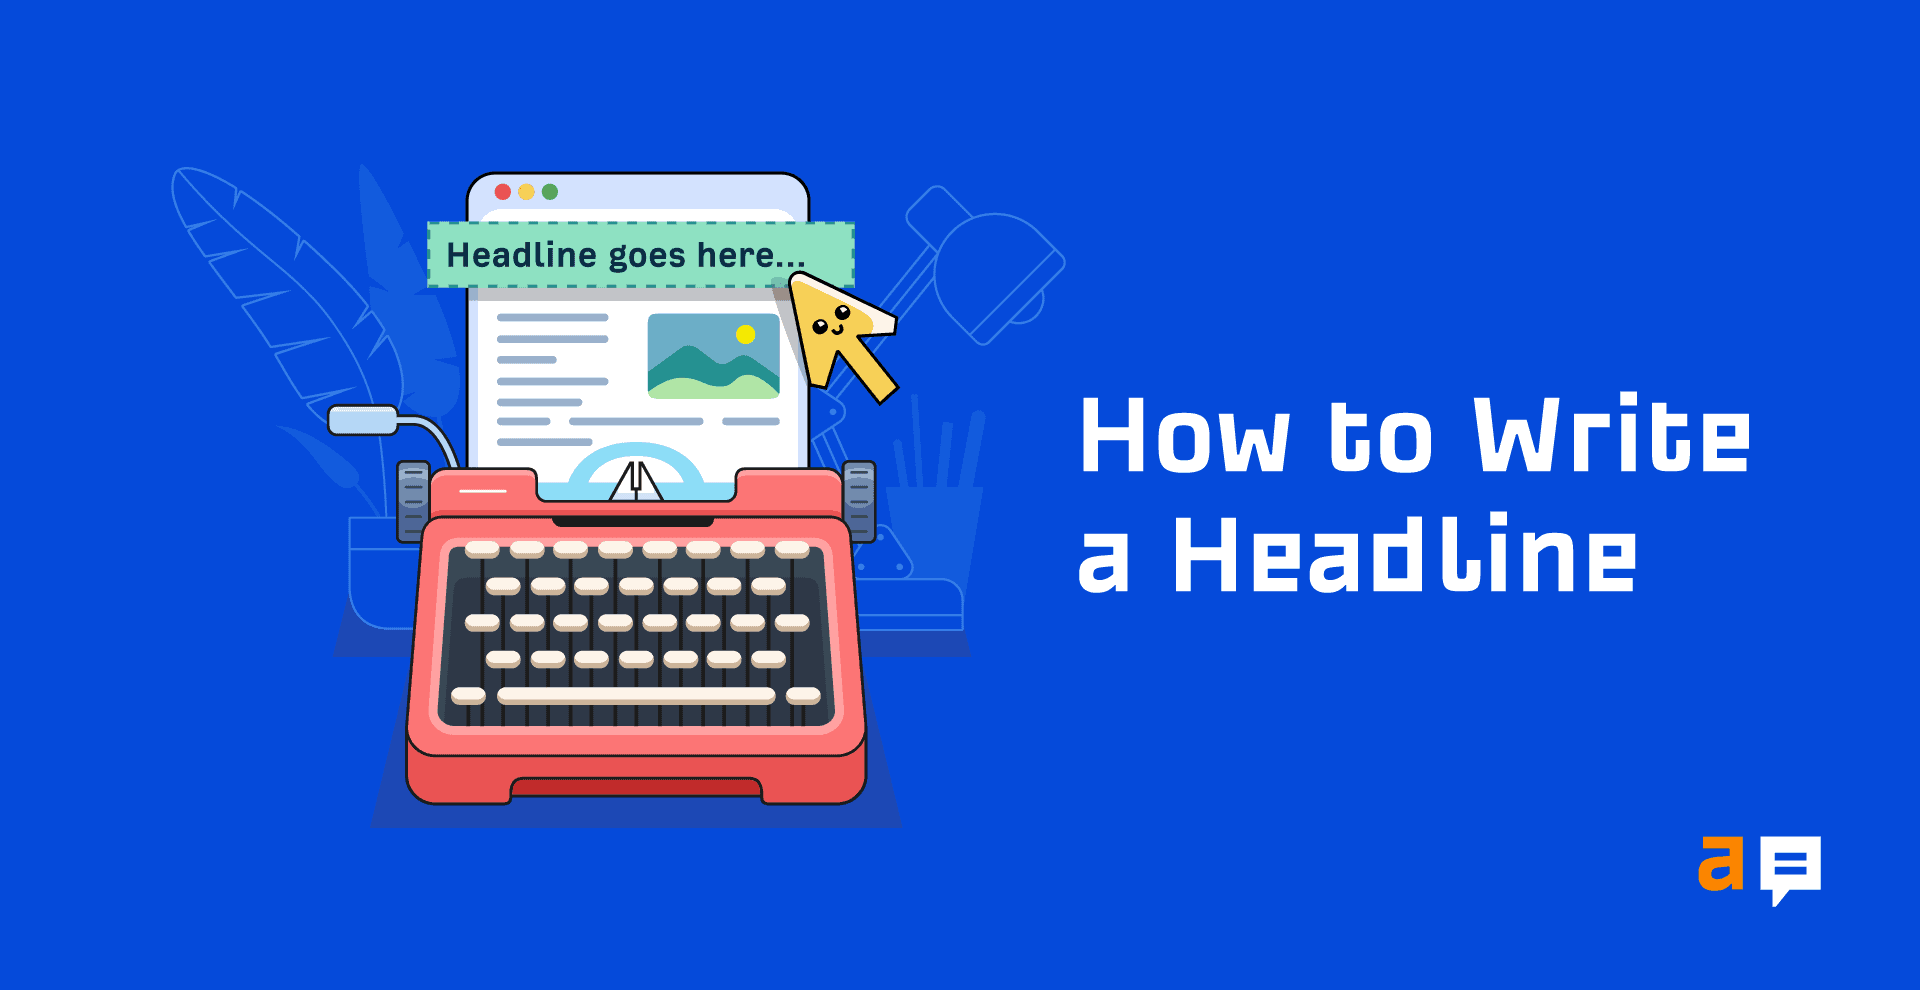 How to Write an Irresistible Headline in 3 Easy Steps